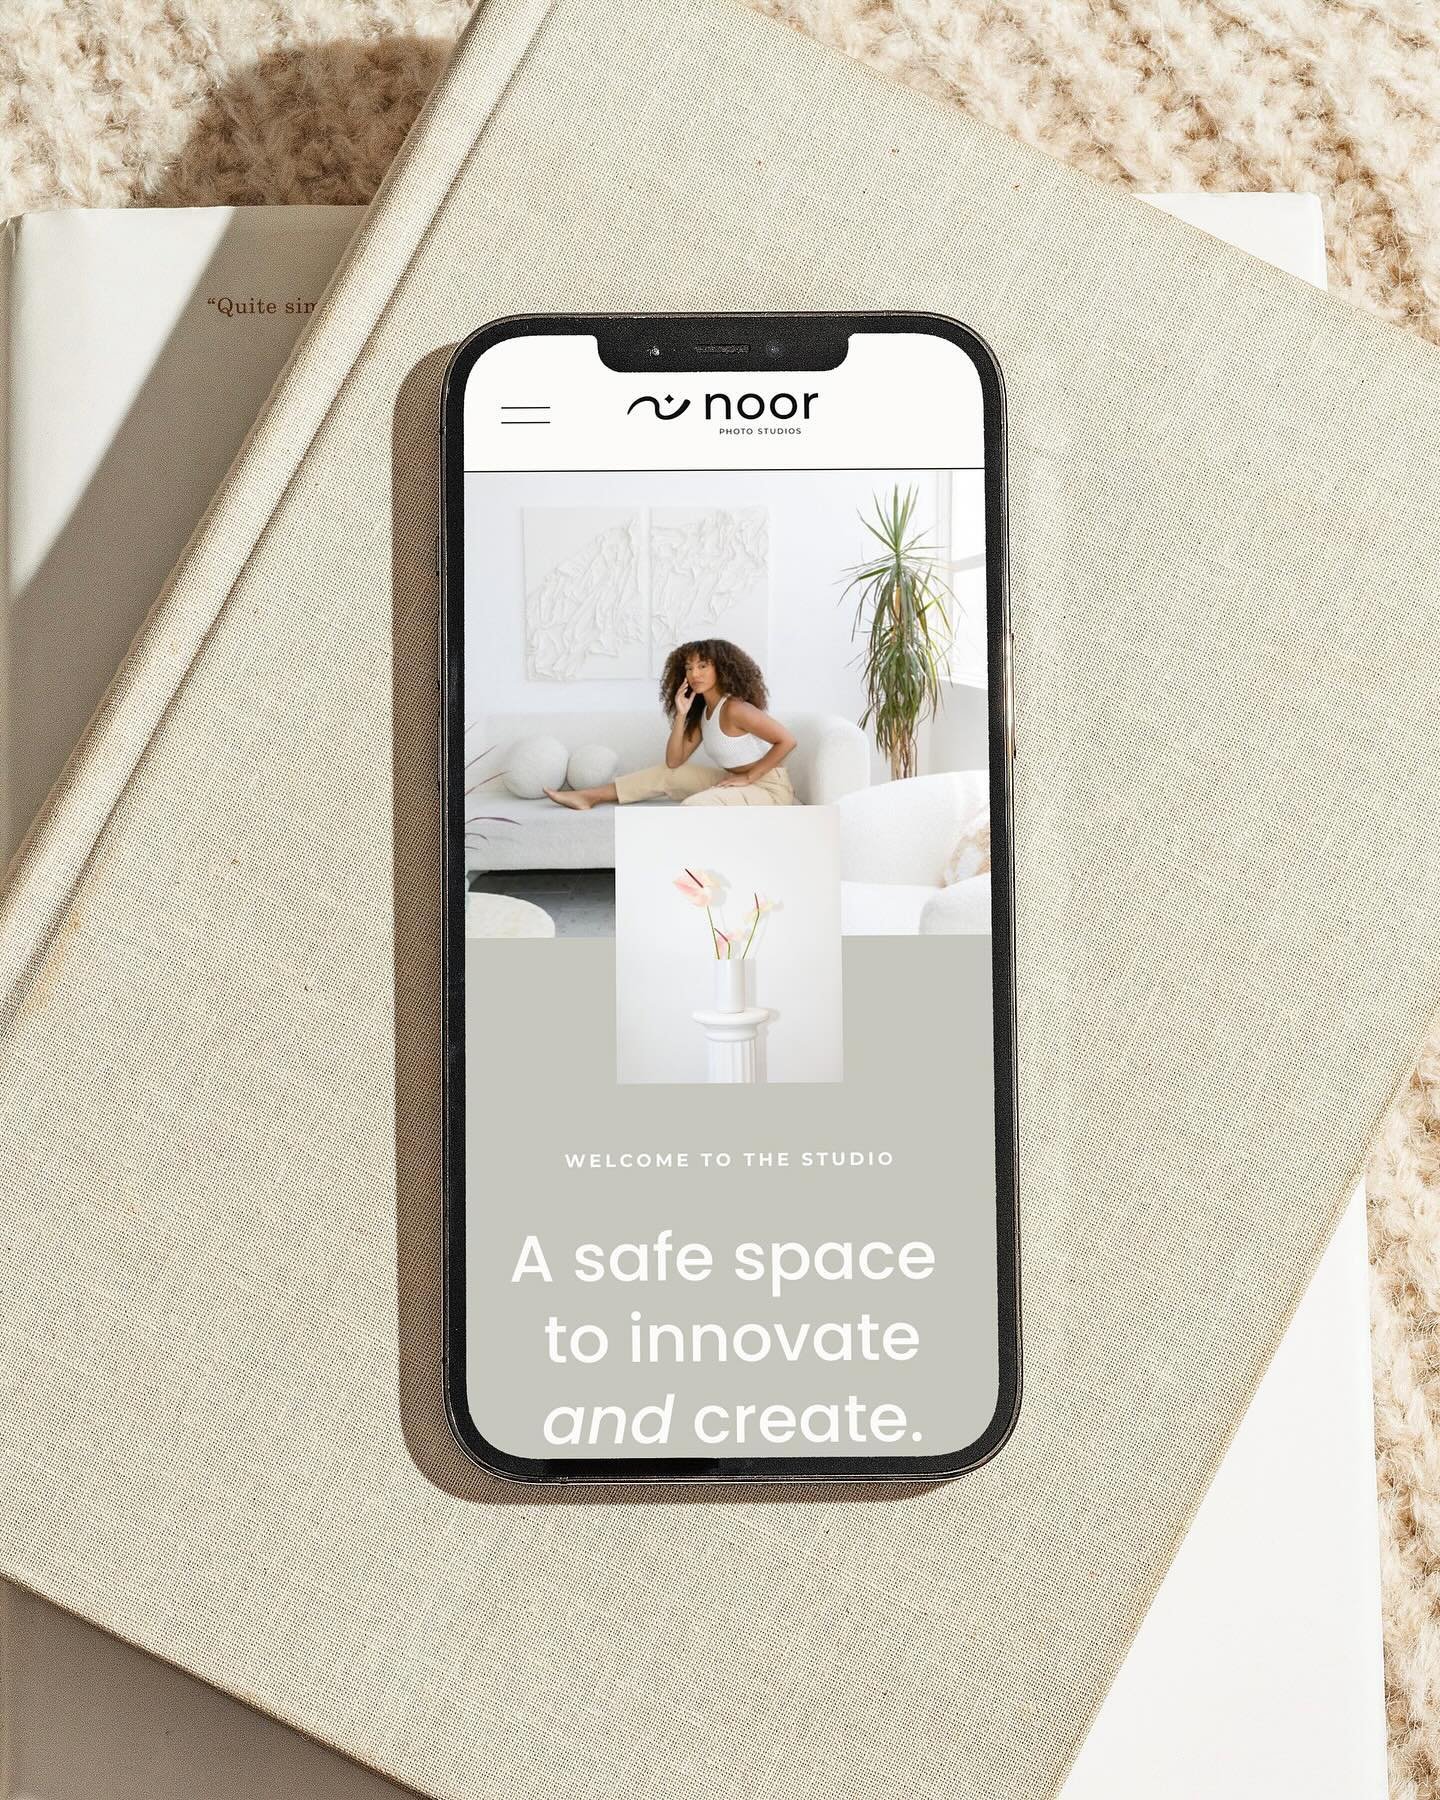 Website reveal for @noor.photostudios ☁️
⠀⠀⠀⠀⠀⠀⠀⠀⠀
Joy came to us with a clear vision for her new photography studio website. She wanted the experience to feel refreshing, engaging, and elevated. ✨
⠀⠀⠀⠀⠀⠀⠀⠀⠀
P.s. Can you believe we created this websi